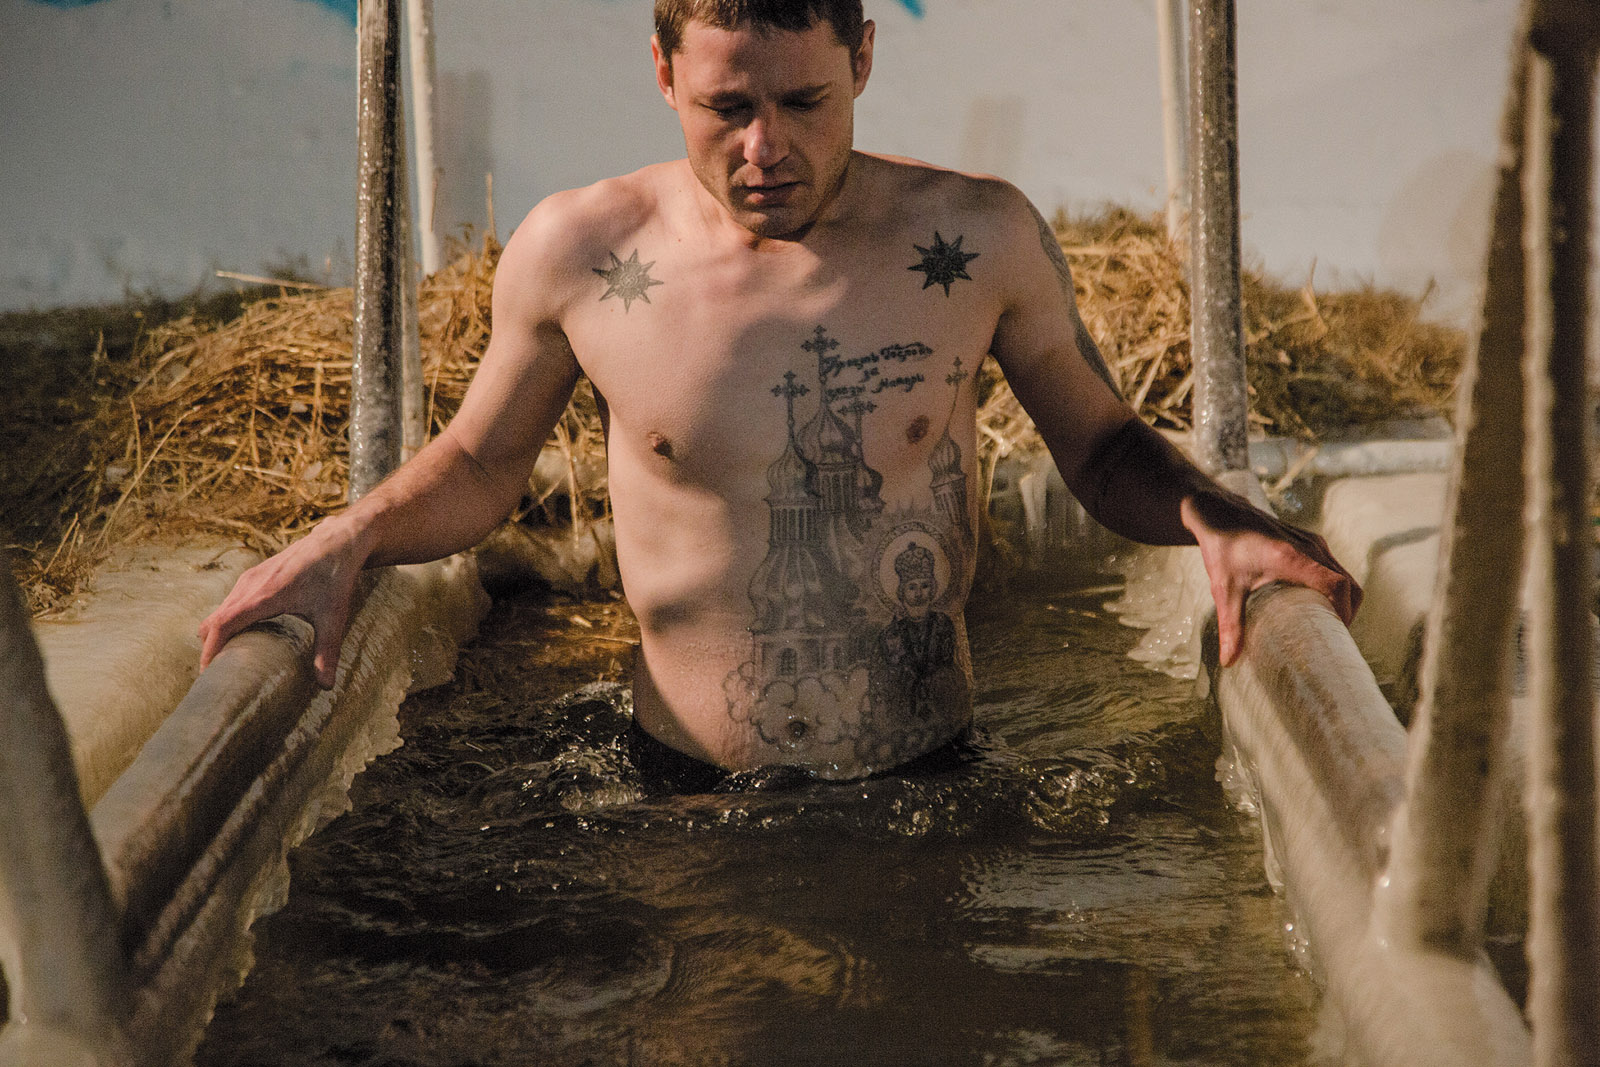 A man with tattoos bathing in the Irtysh River